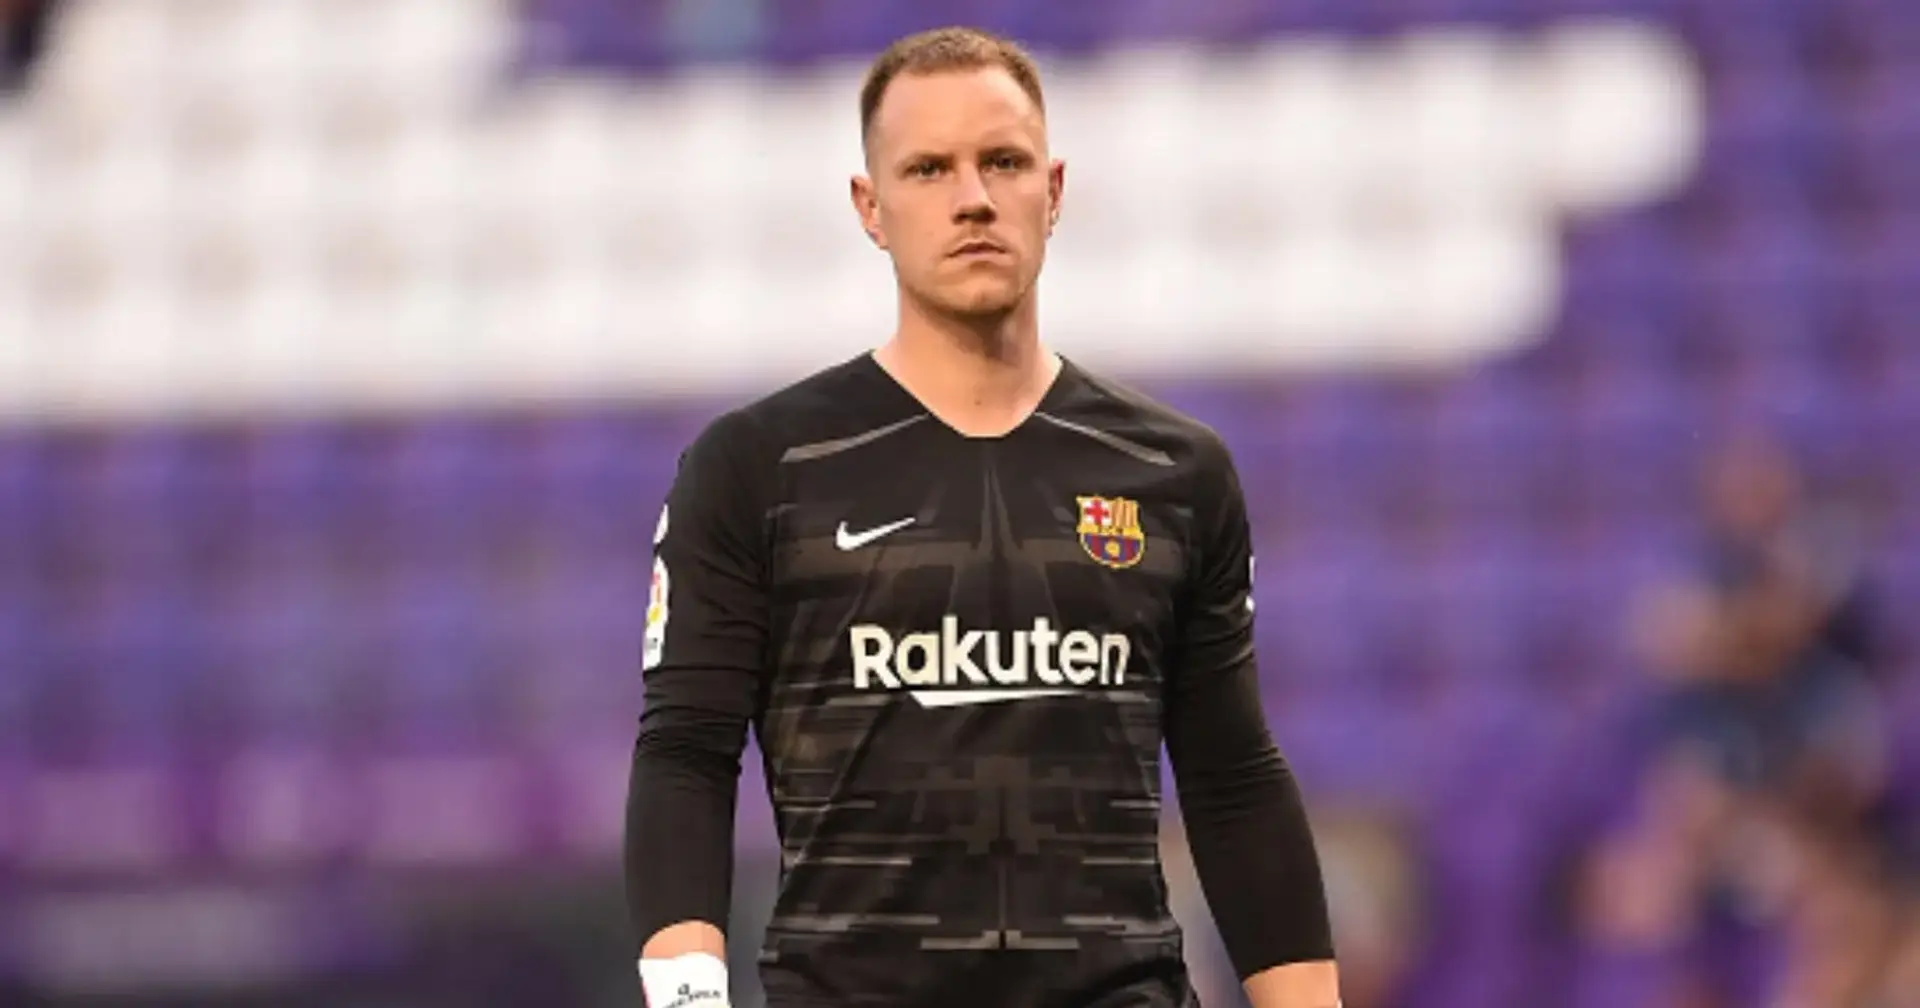 Ter Stegen reportedly asks more time to decide as Barca offer new 5-year contract